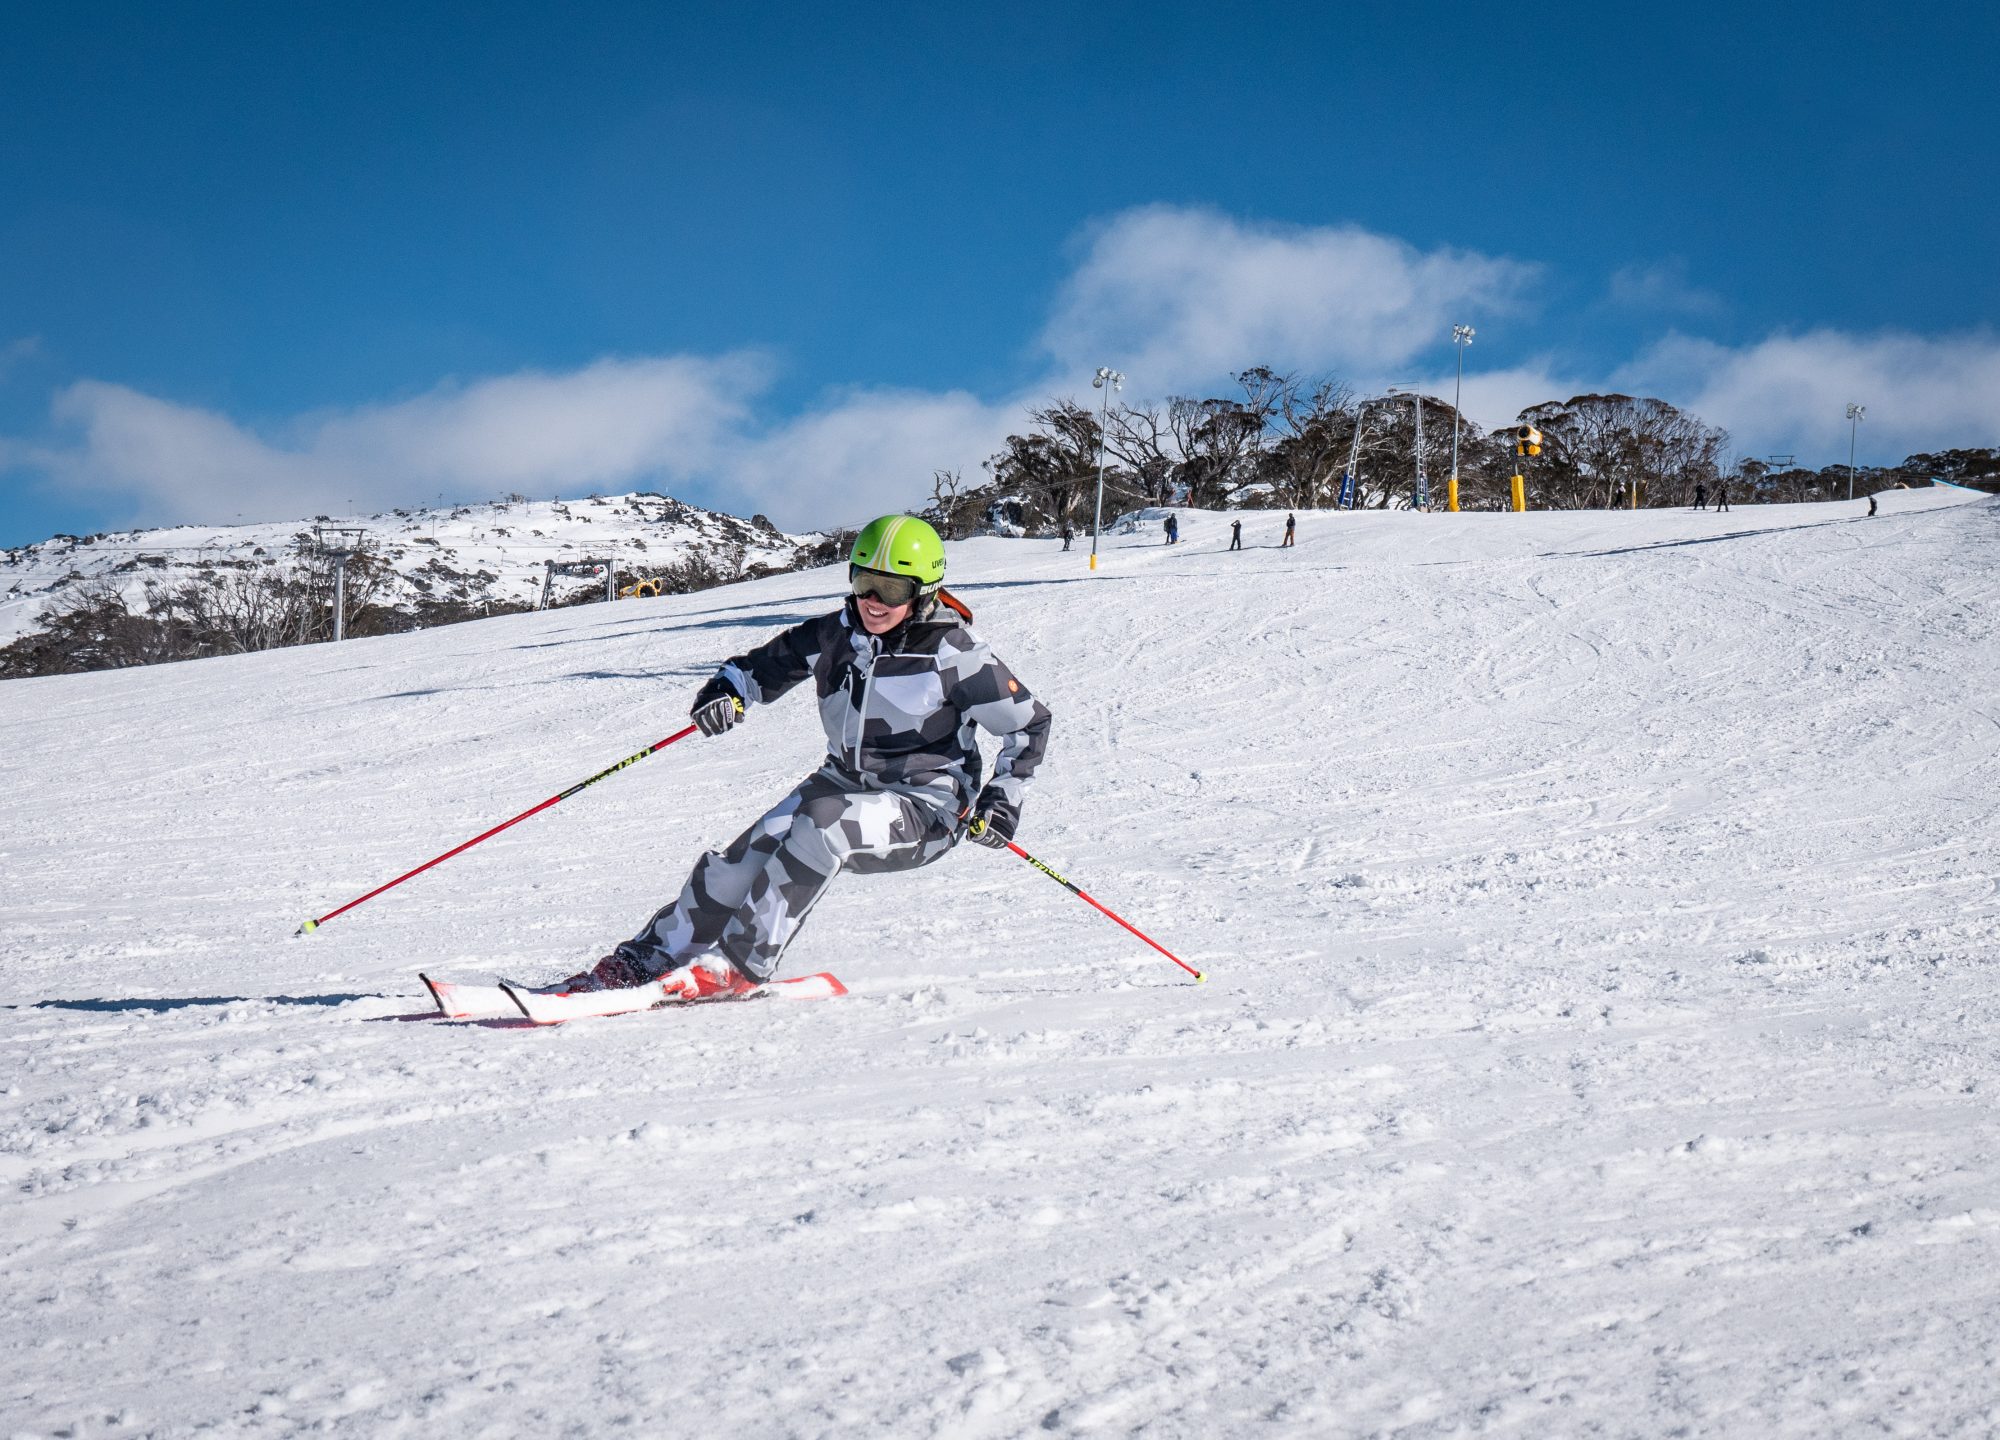 Perisher ski resort. Epic Australia Pass Now Includes Unlimited, Unrestricted Access to Hotham Alpine Resort with Sales Deadline Extended to 18 June